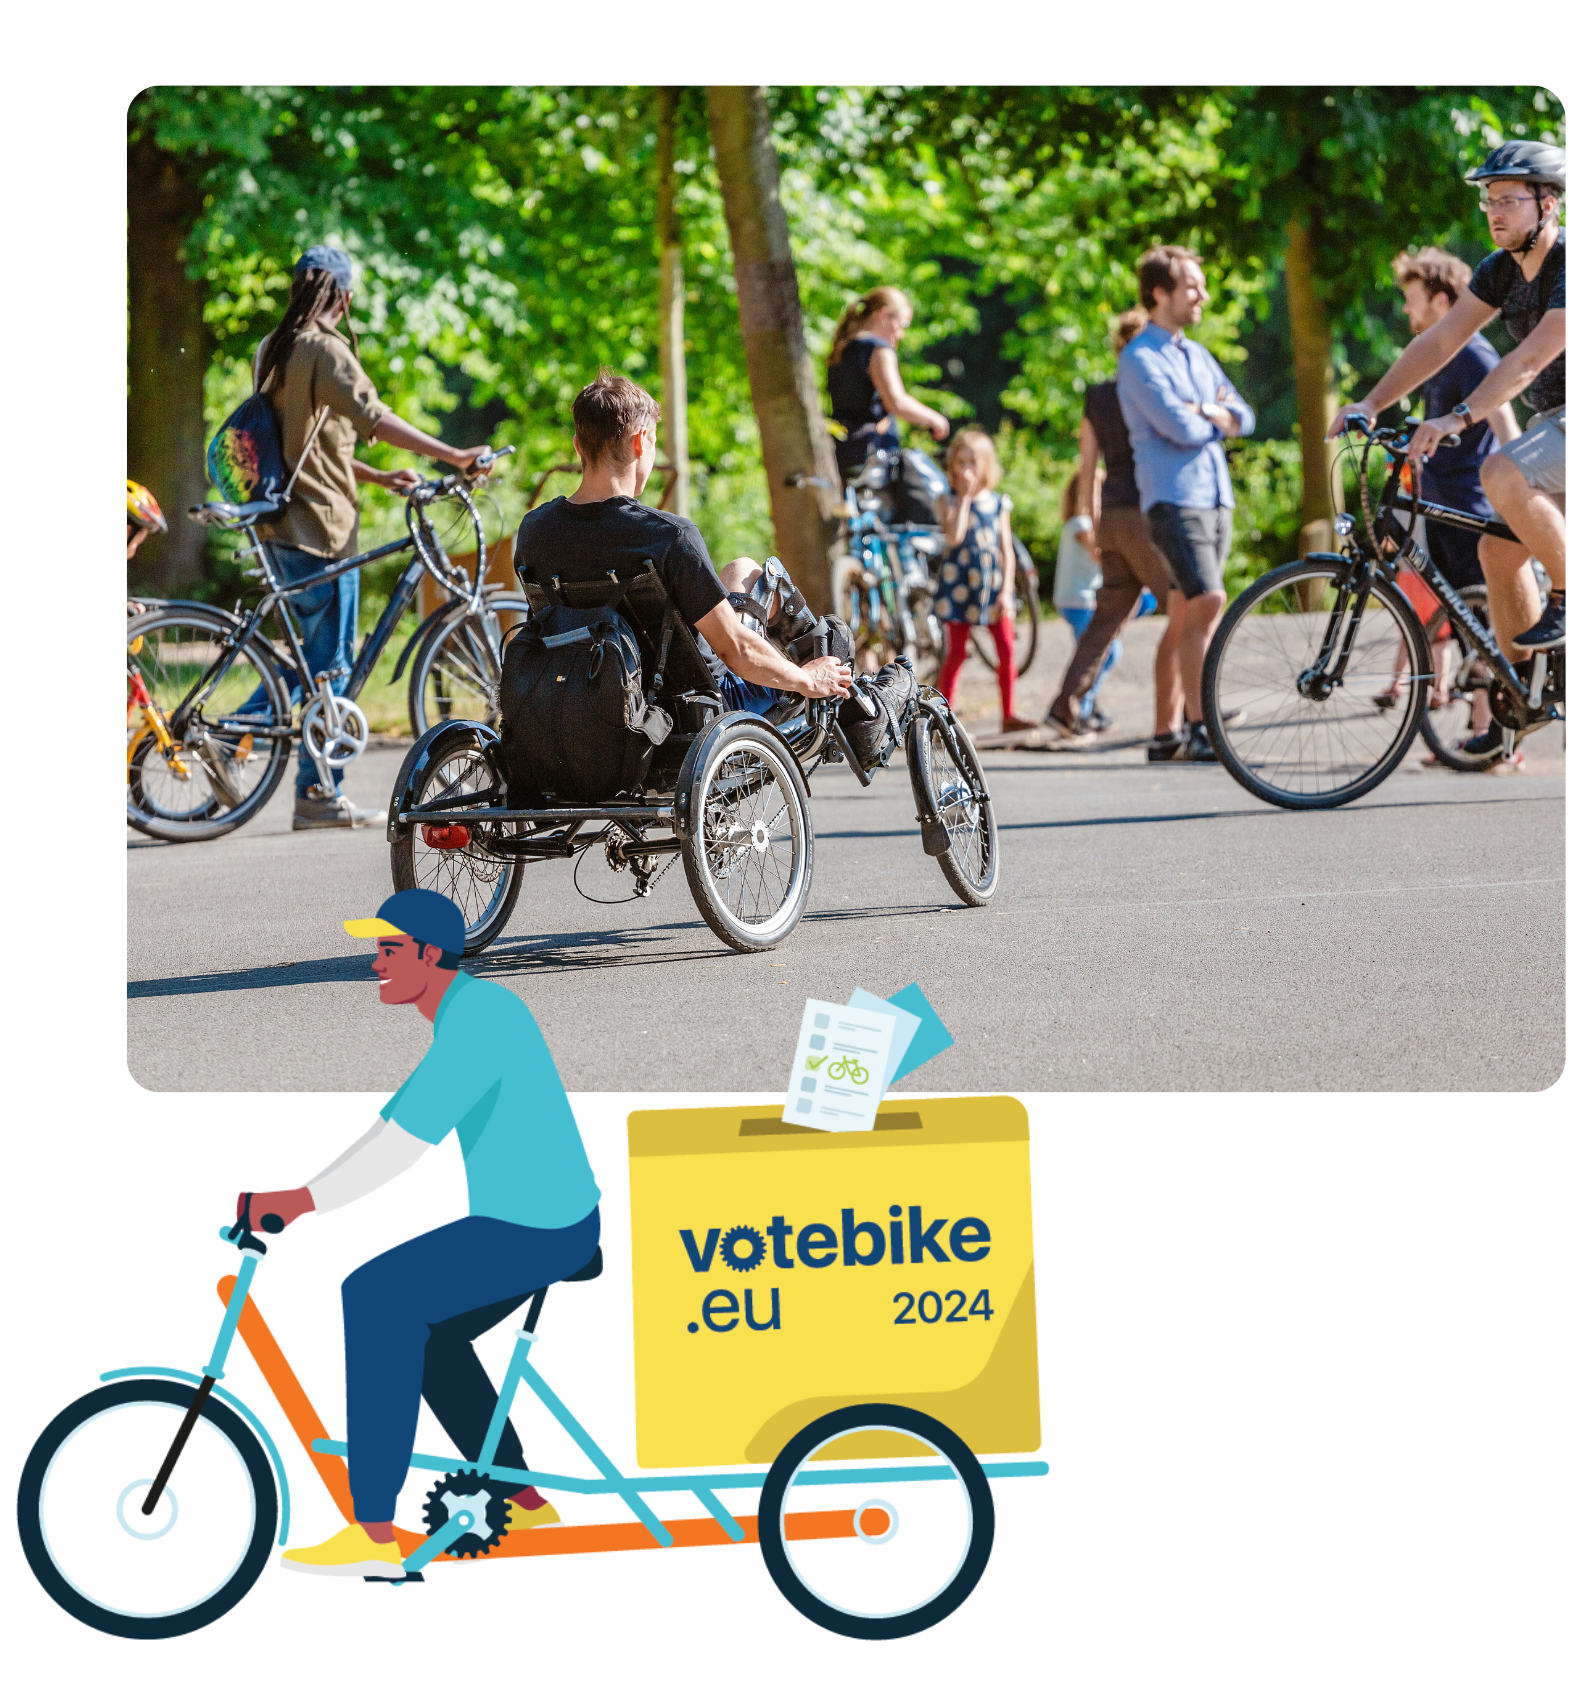 photo of diverse group of cyclists and an illustration of a man on a cargo bike